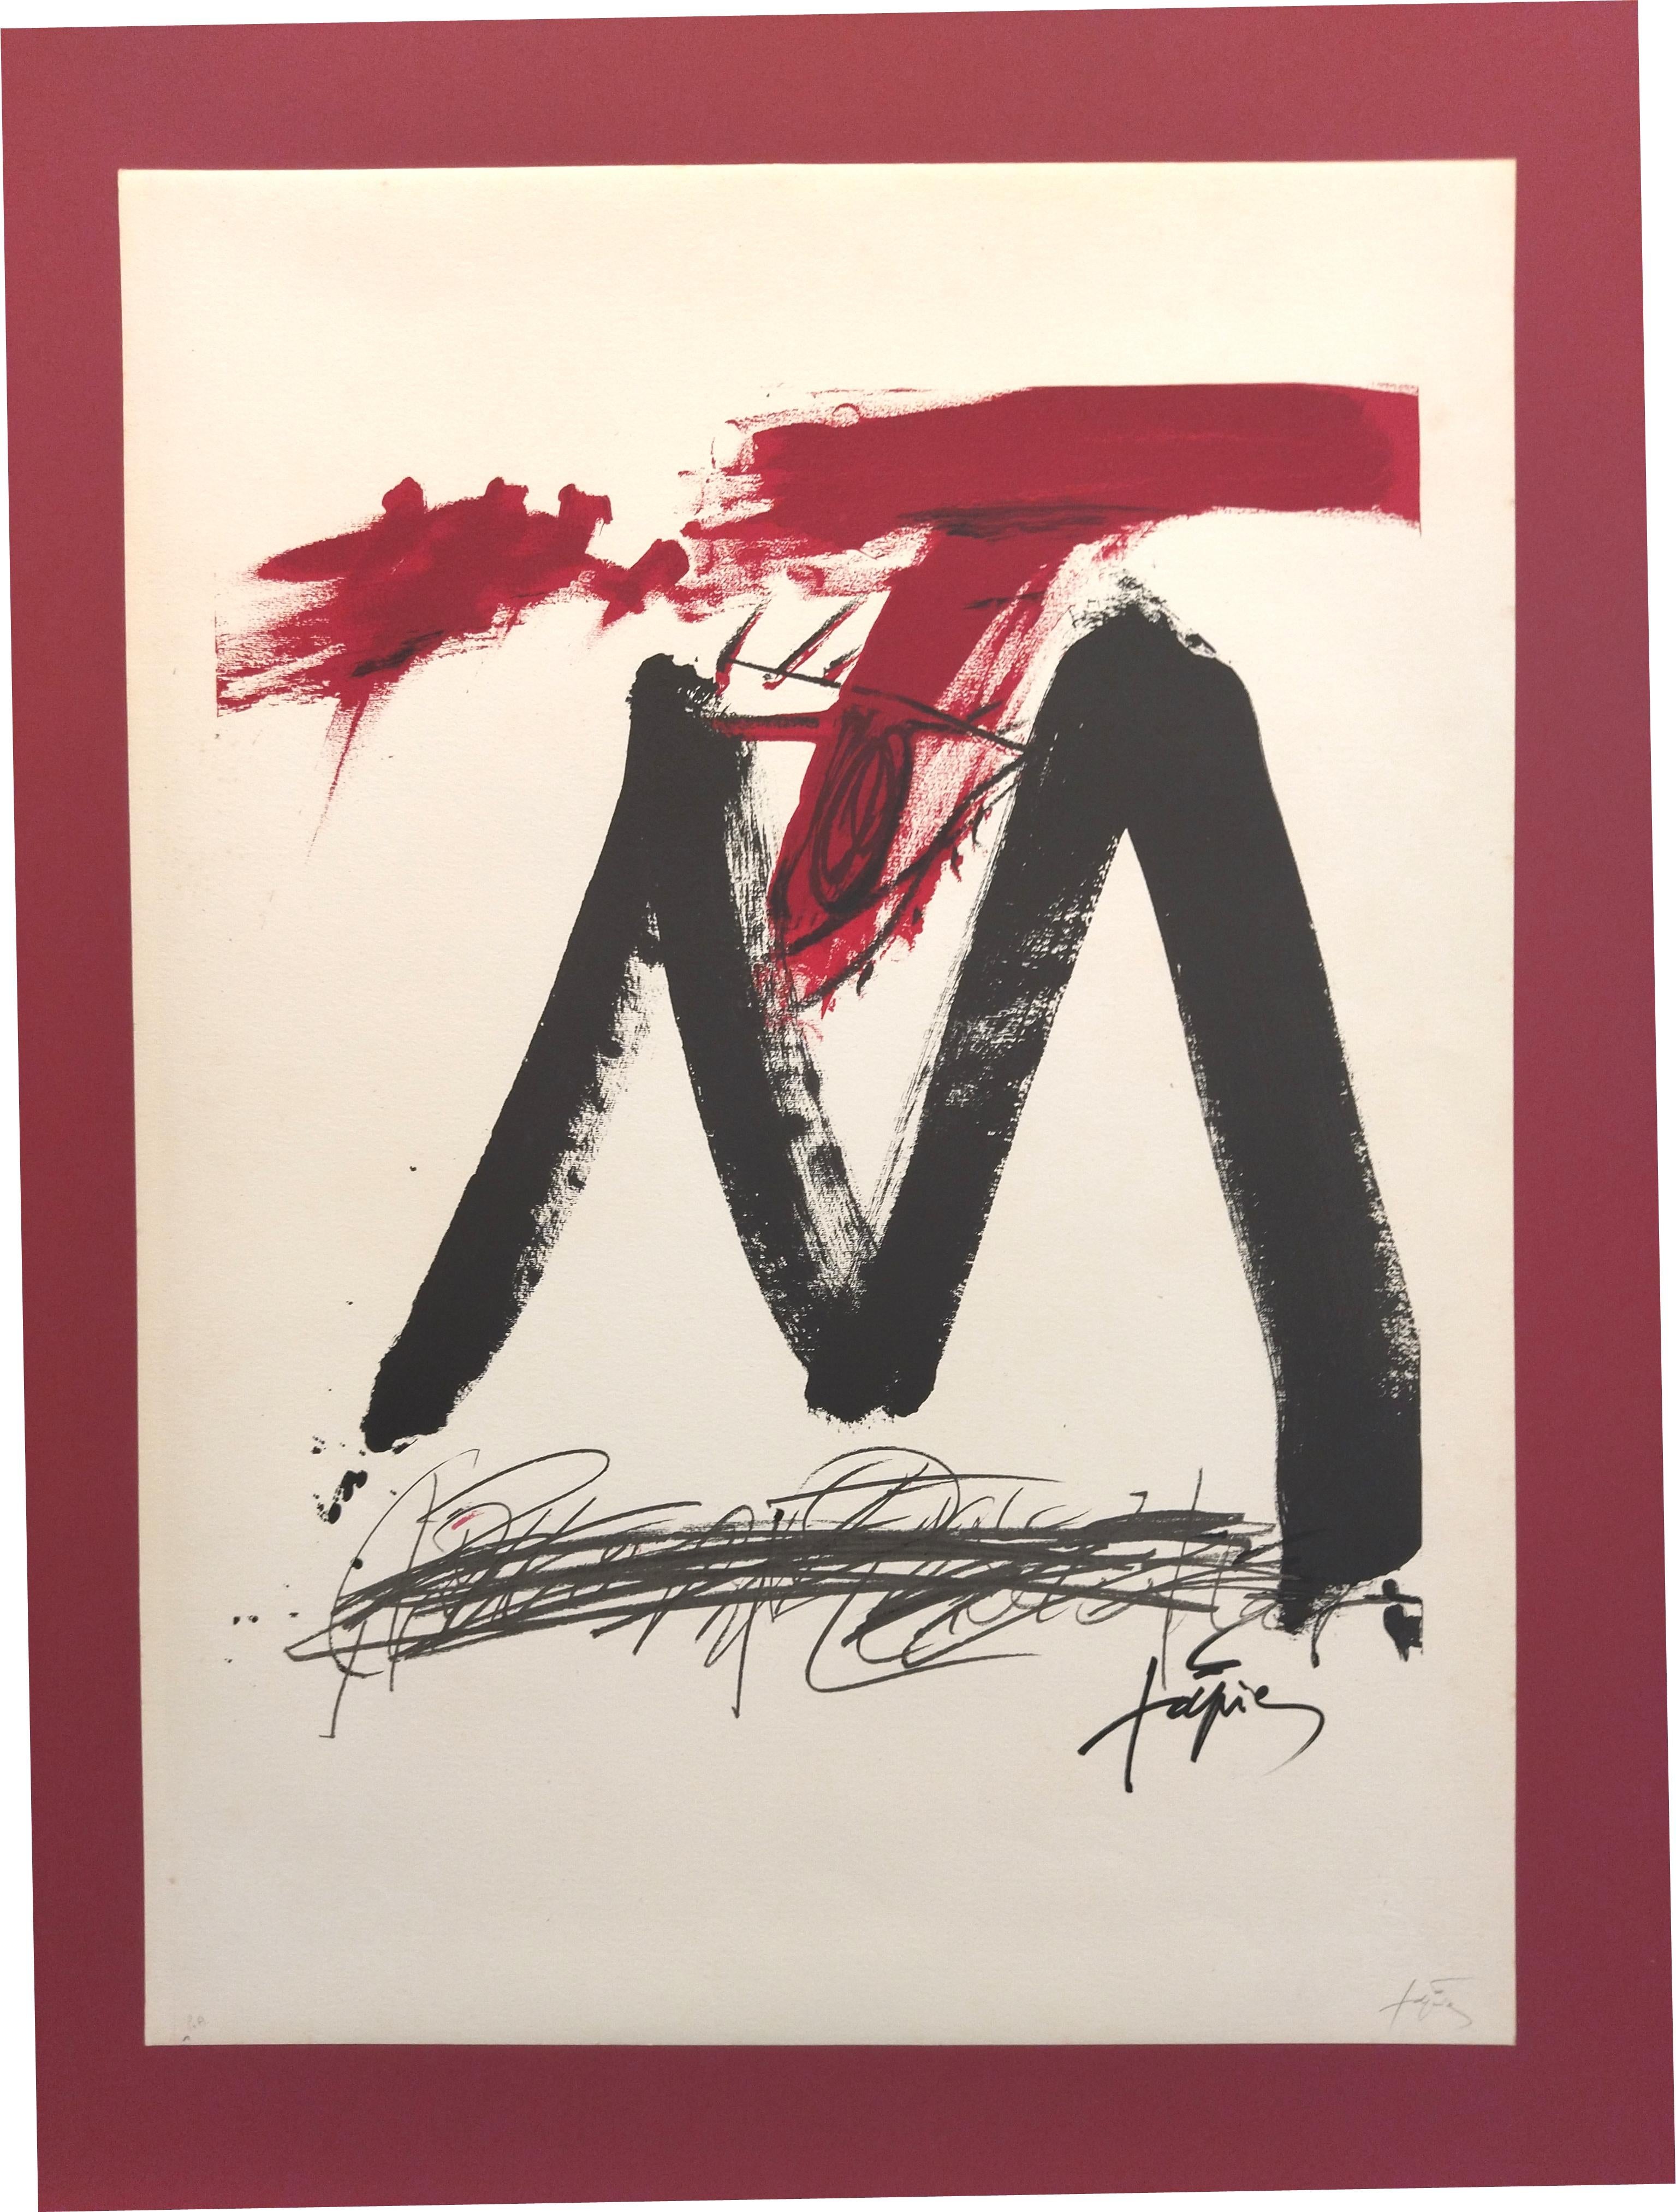 Tapies   Vertical  Red  Black  original lithograph abstract painting - Print by Antoni Tàpies